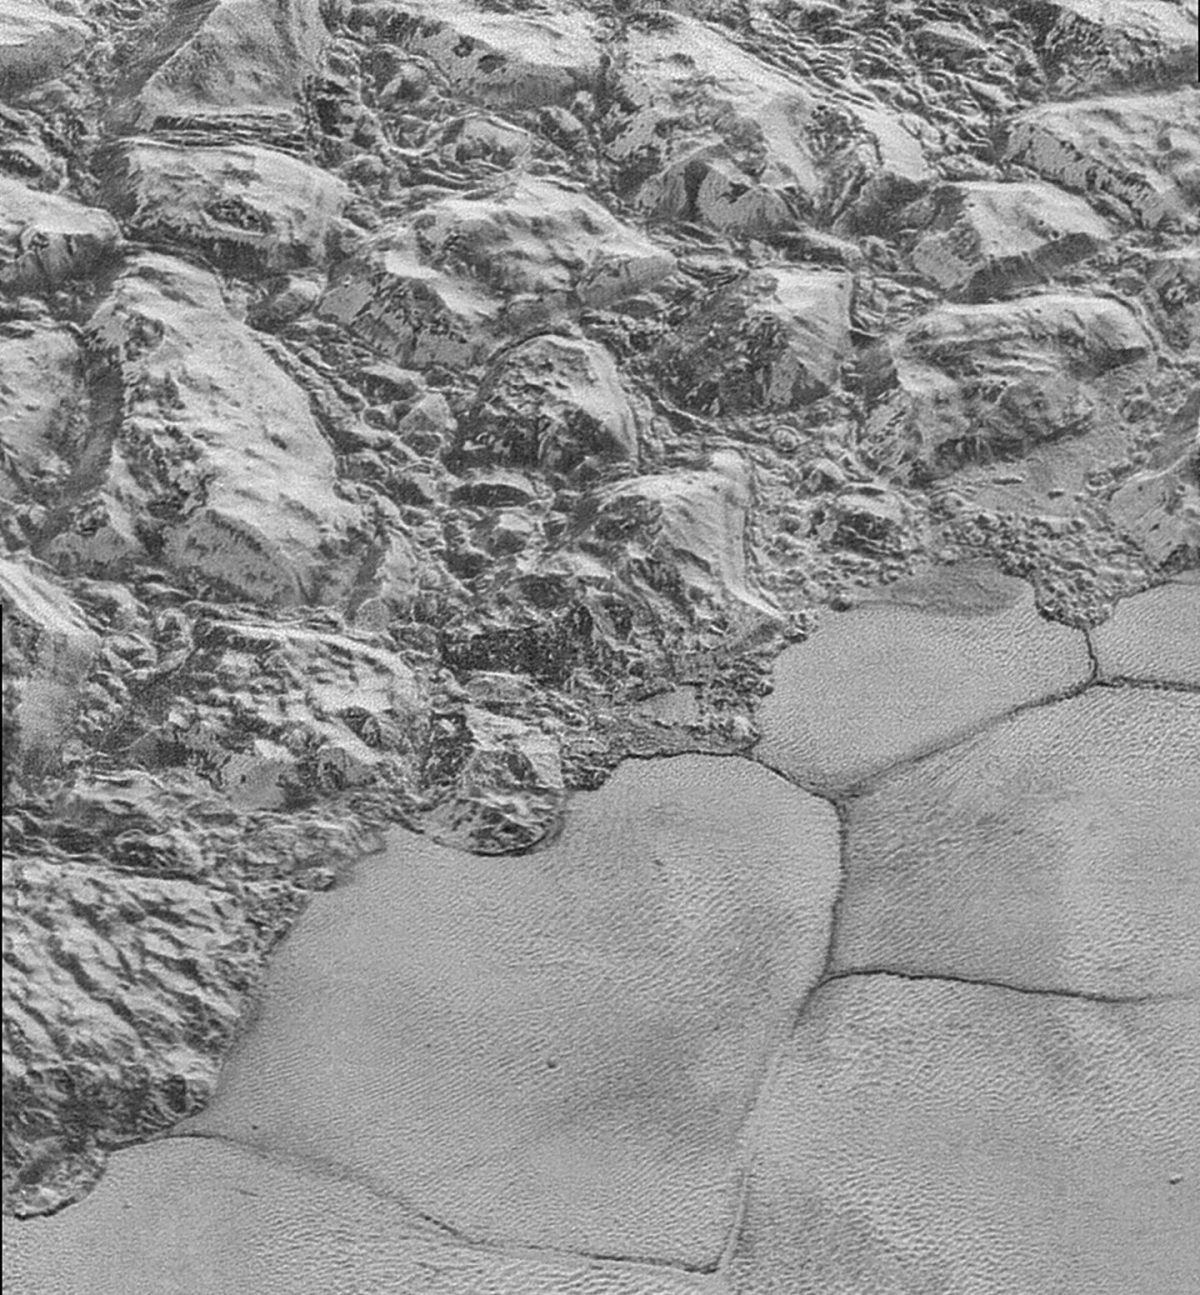 How Pluto Formed Its Mysterious Dunes